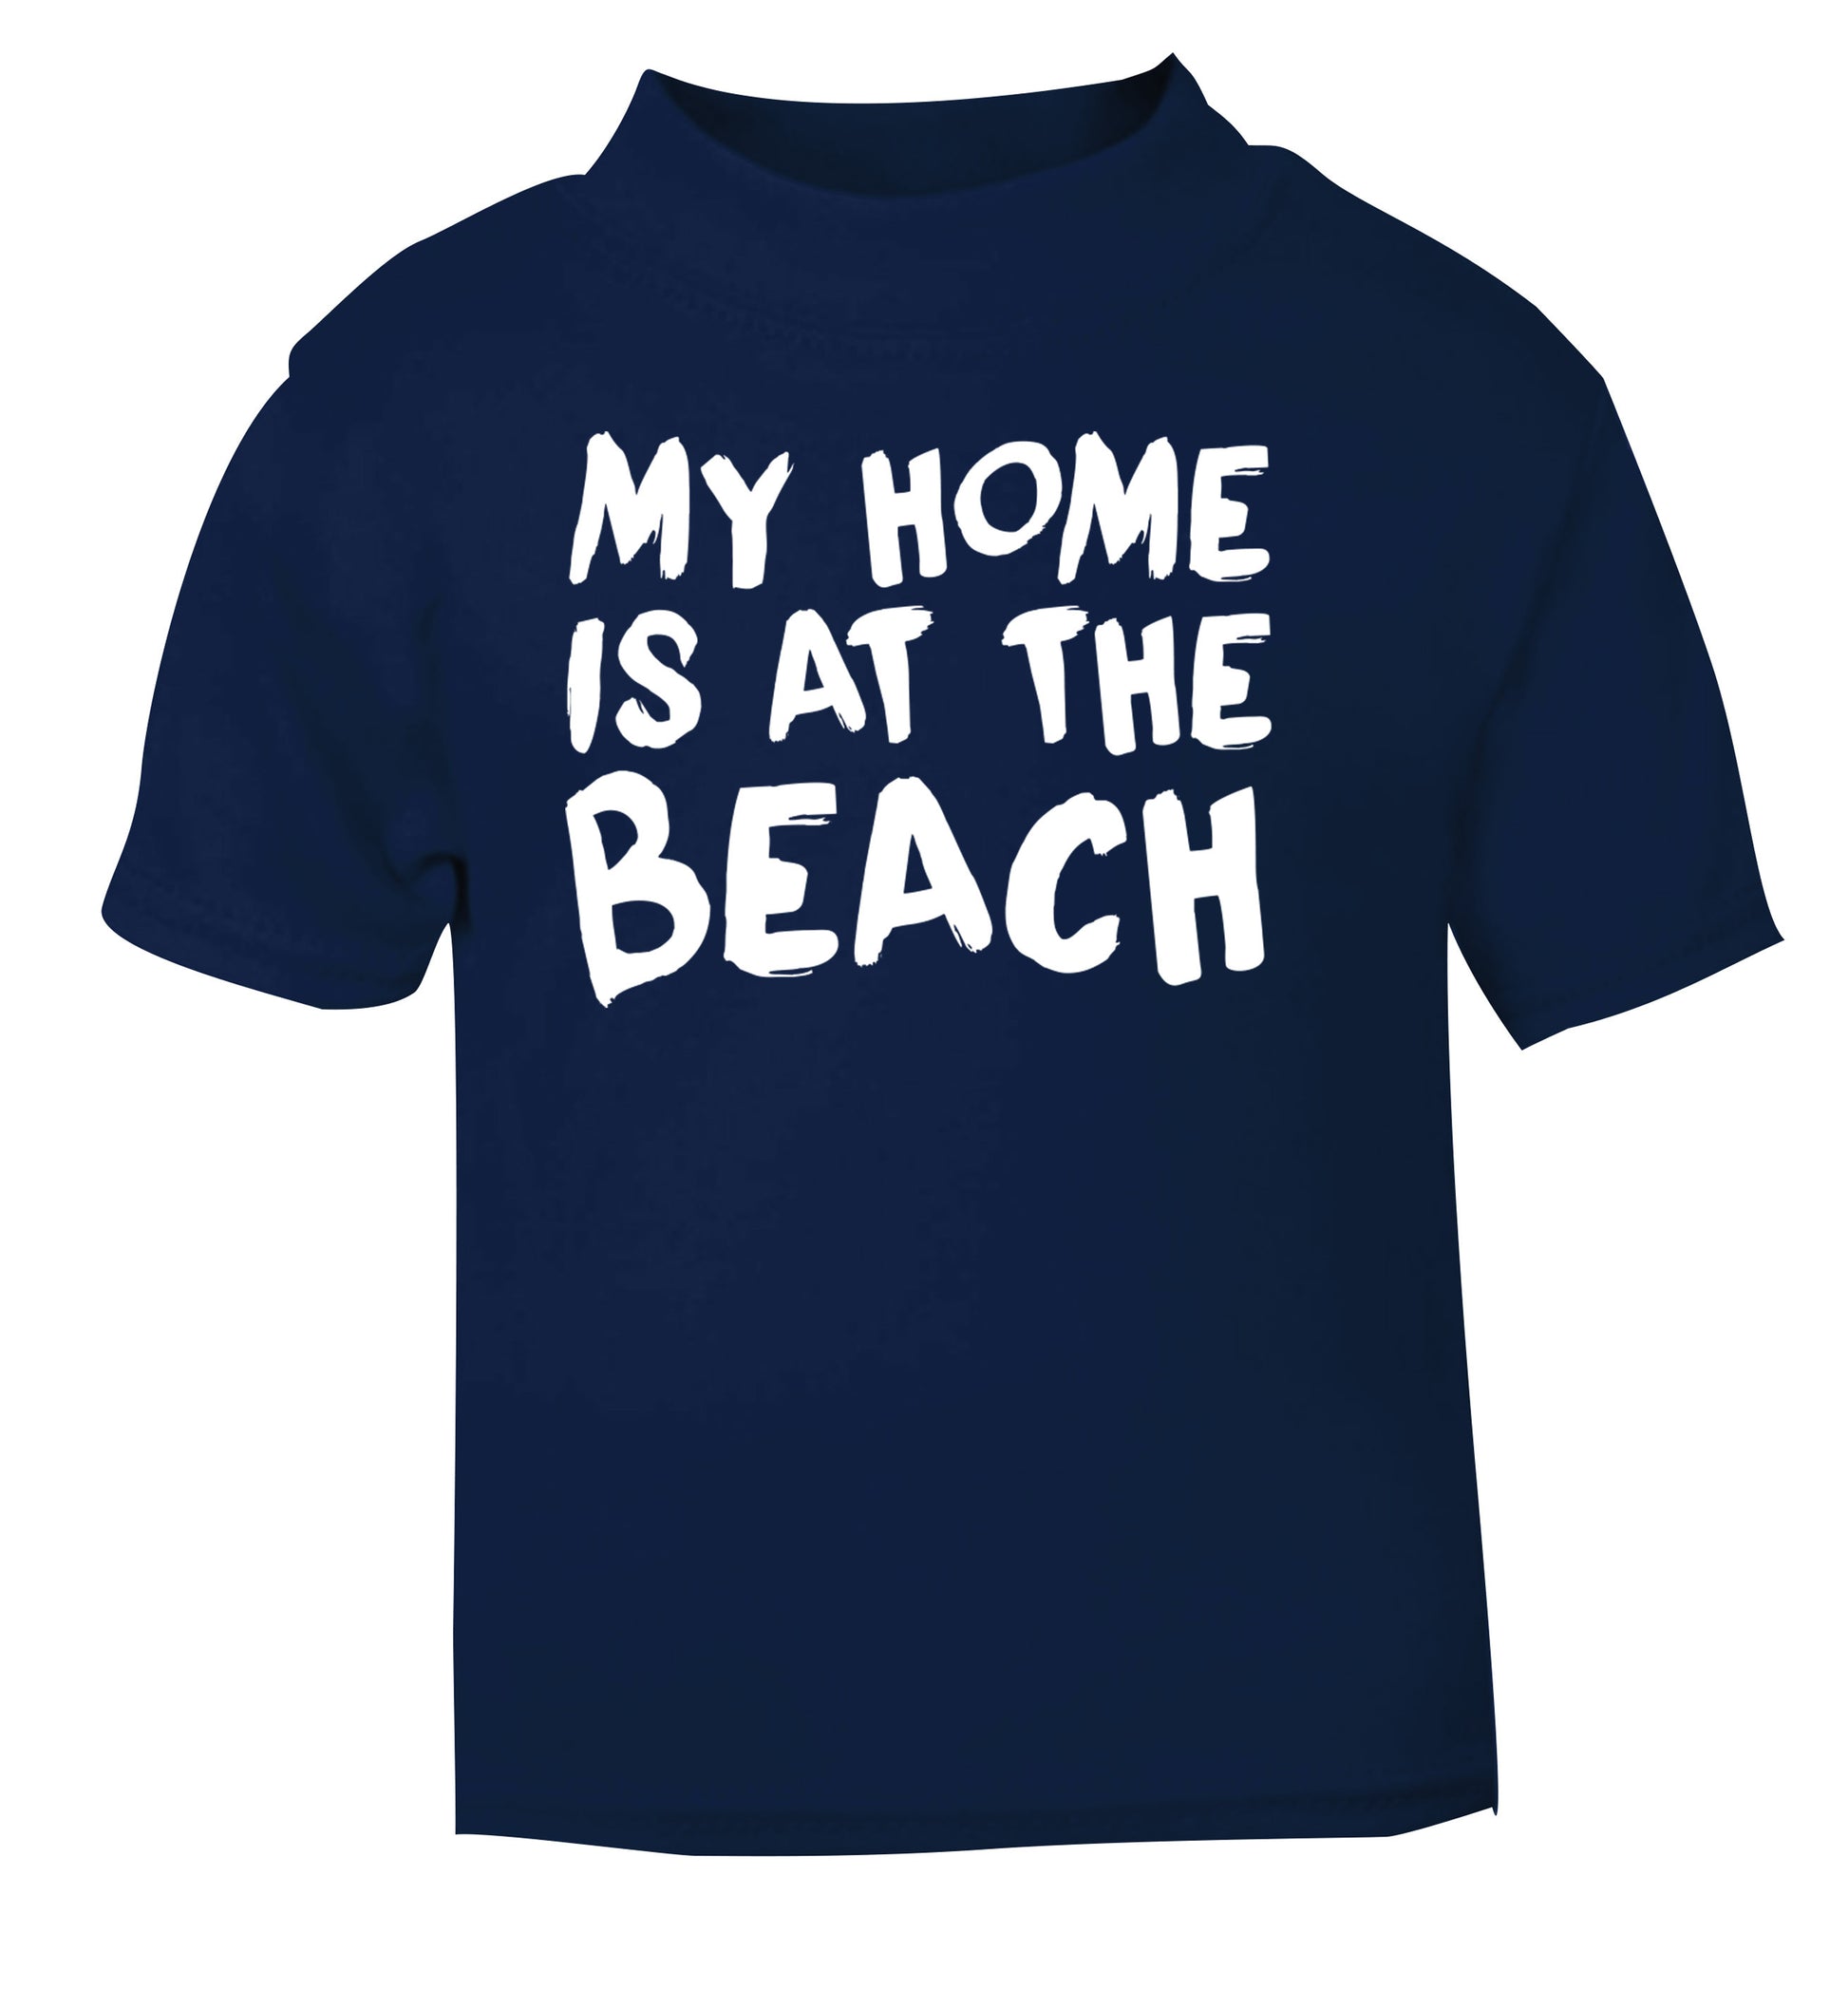 My home is at the beach navy Baby Toddler Tshirt 2 Years